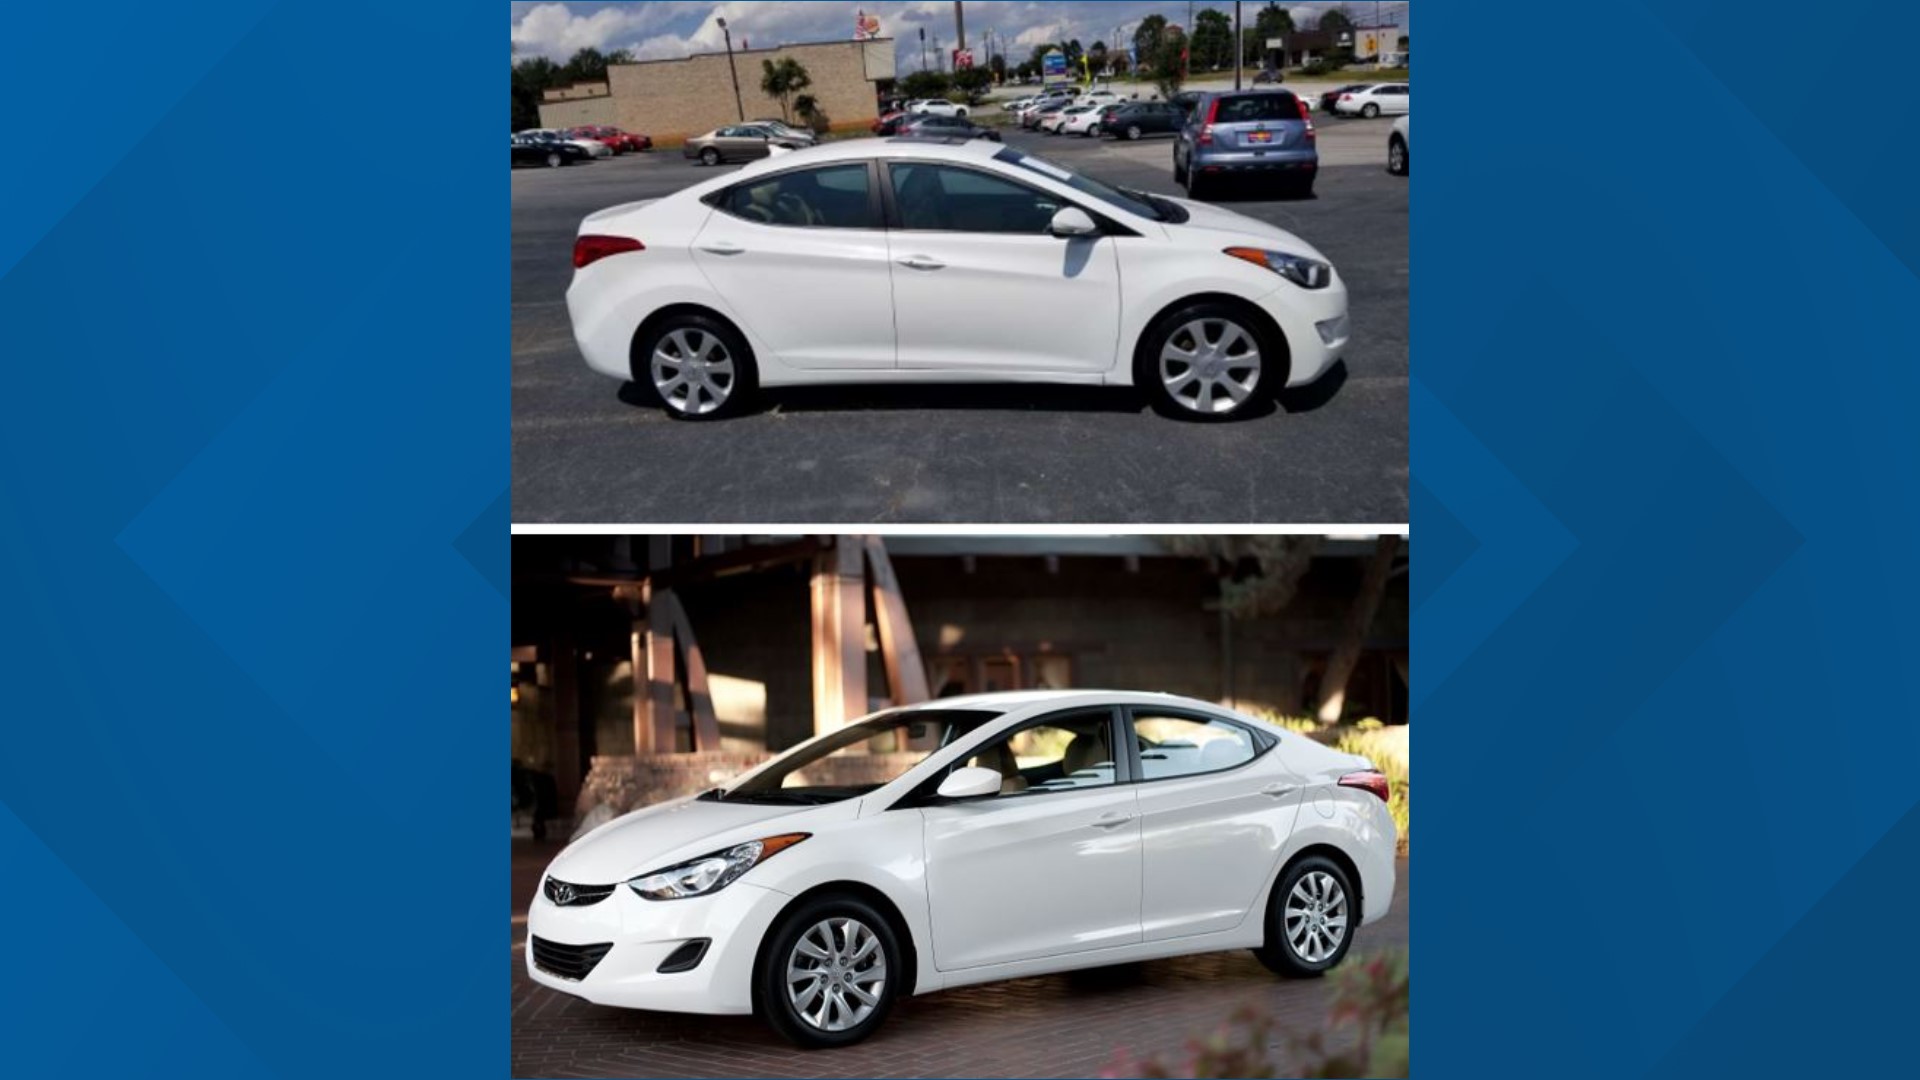 Detectives said they are interested in speaking with the occupant(s) of a white 2011-2013 Hyundai Elantra with an unknown license plate.